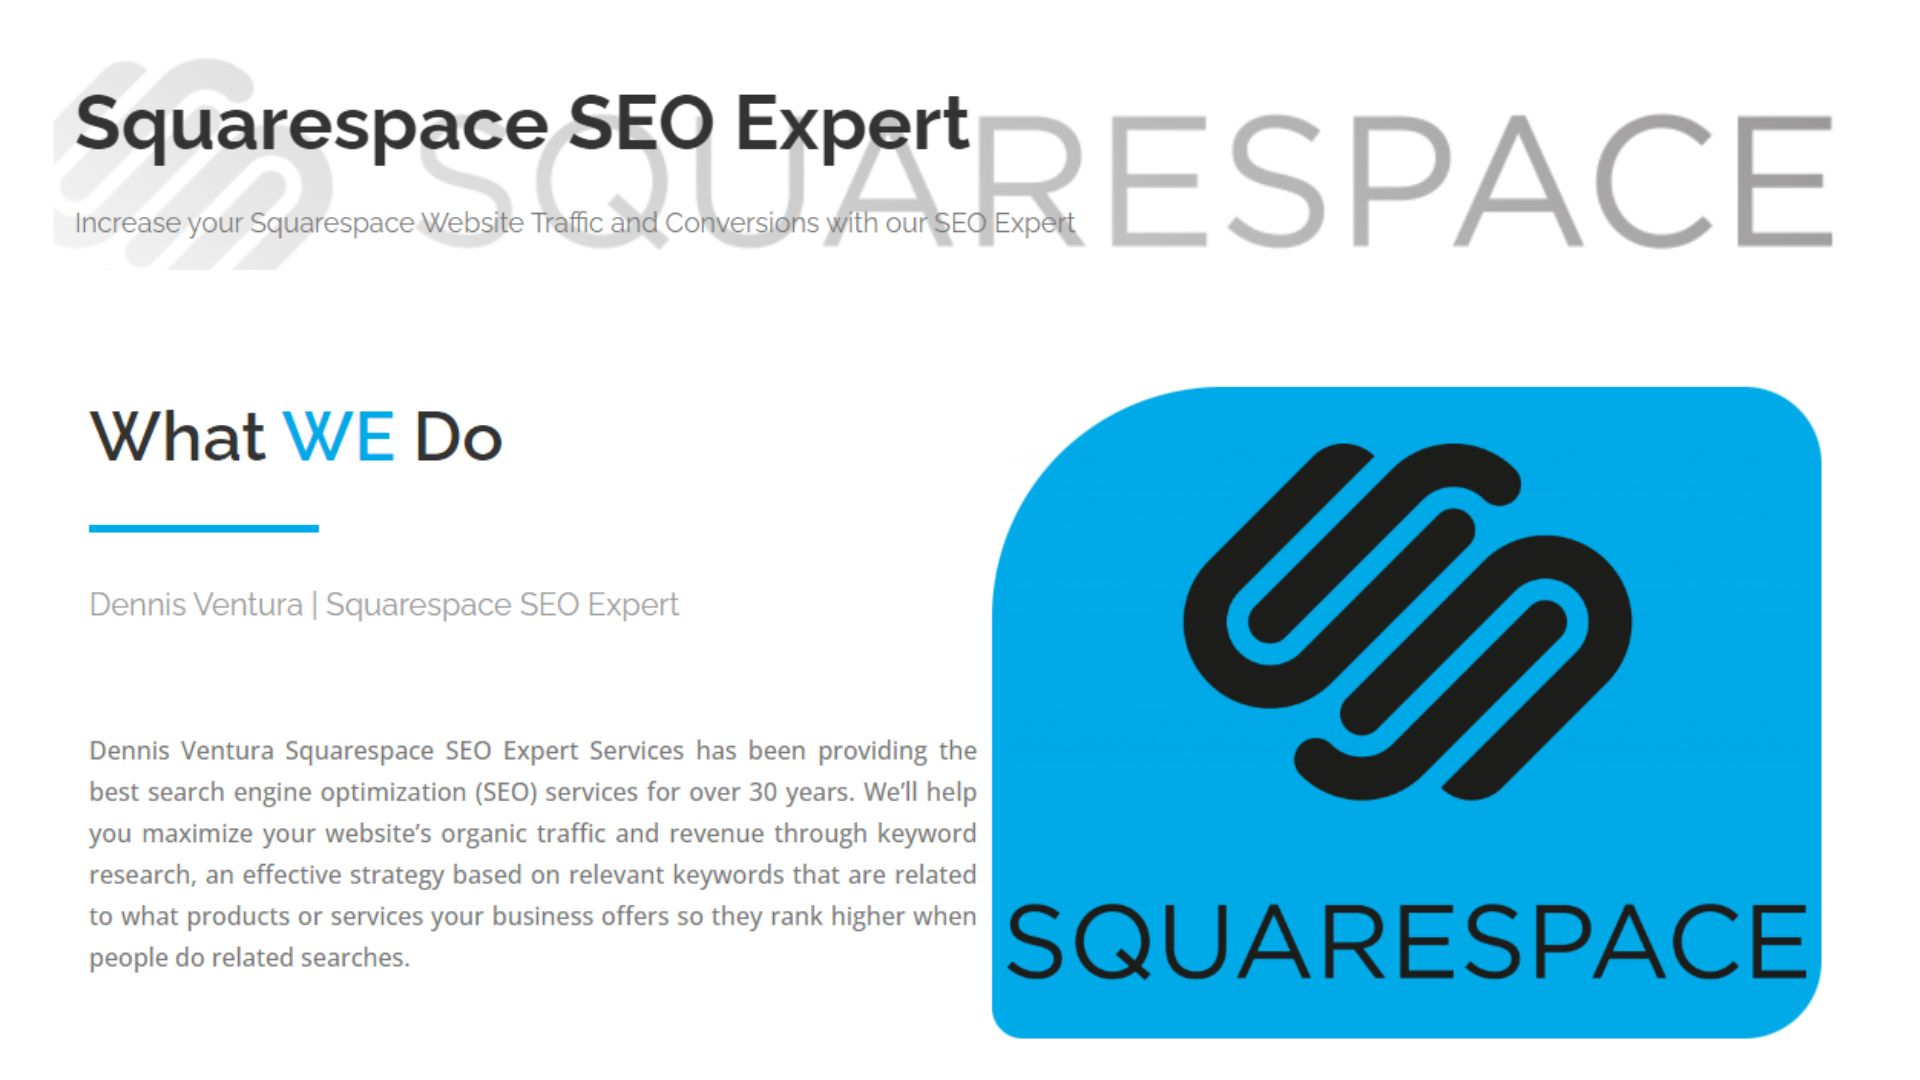 How Do You Make Your Squarespace Website Stand out With Squarespace SEO Expert?